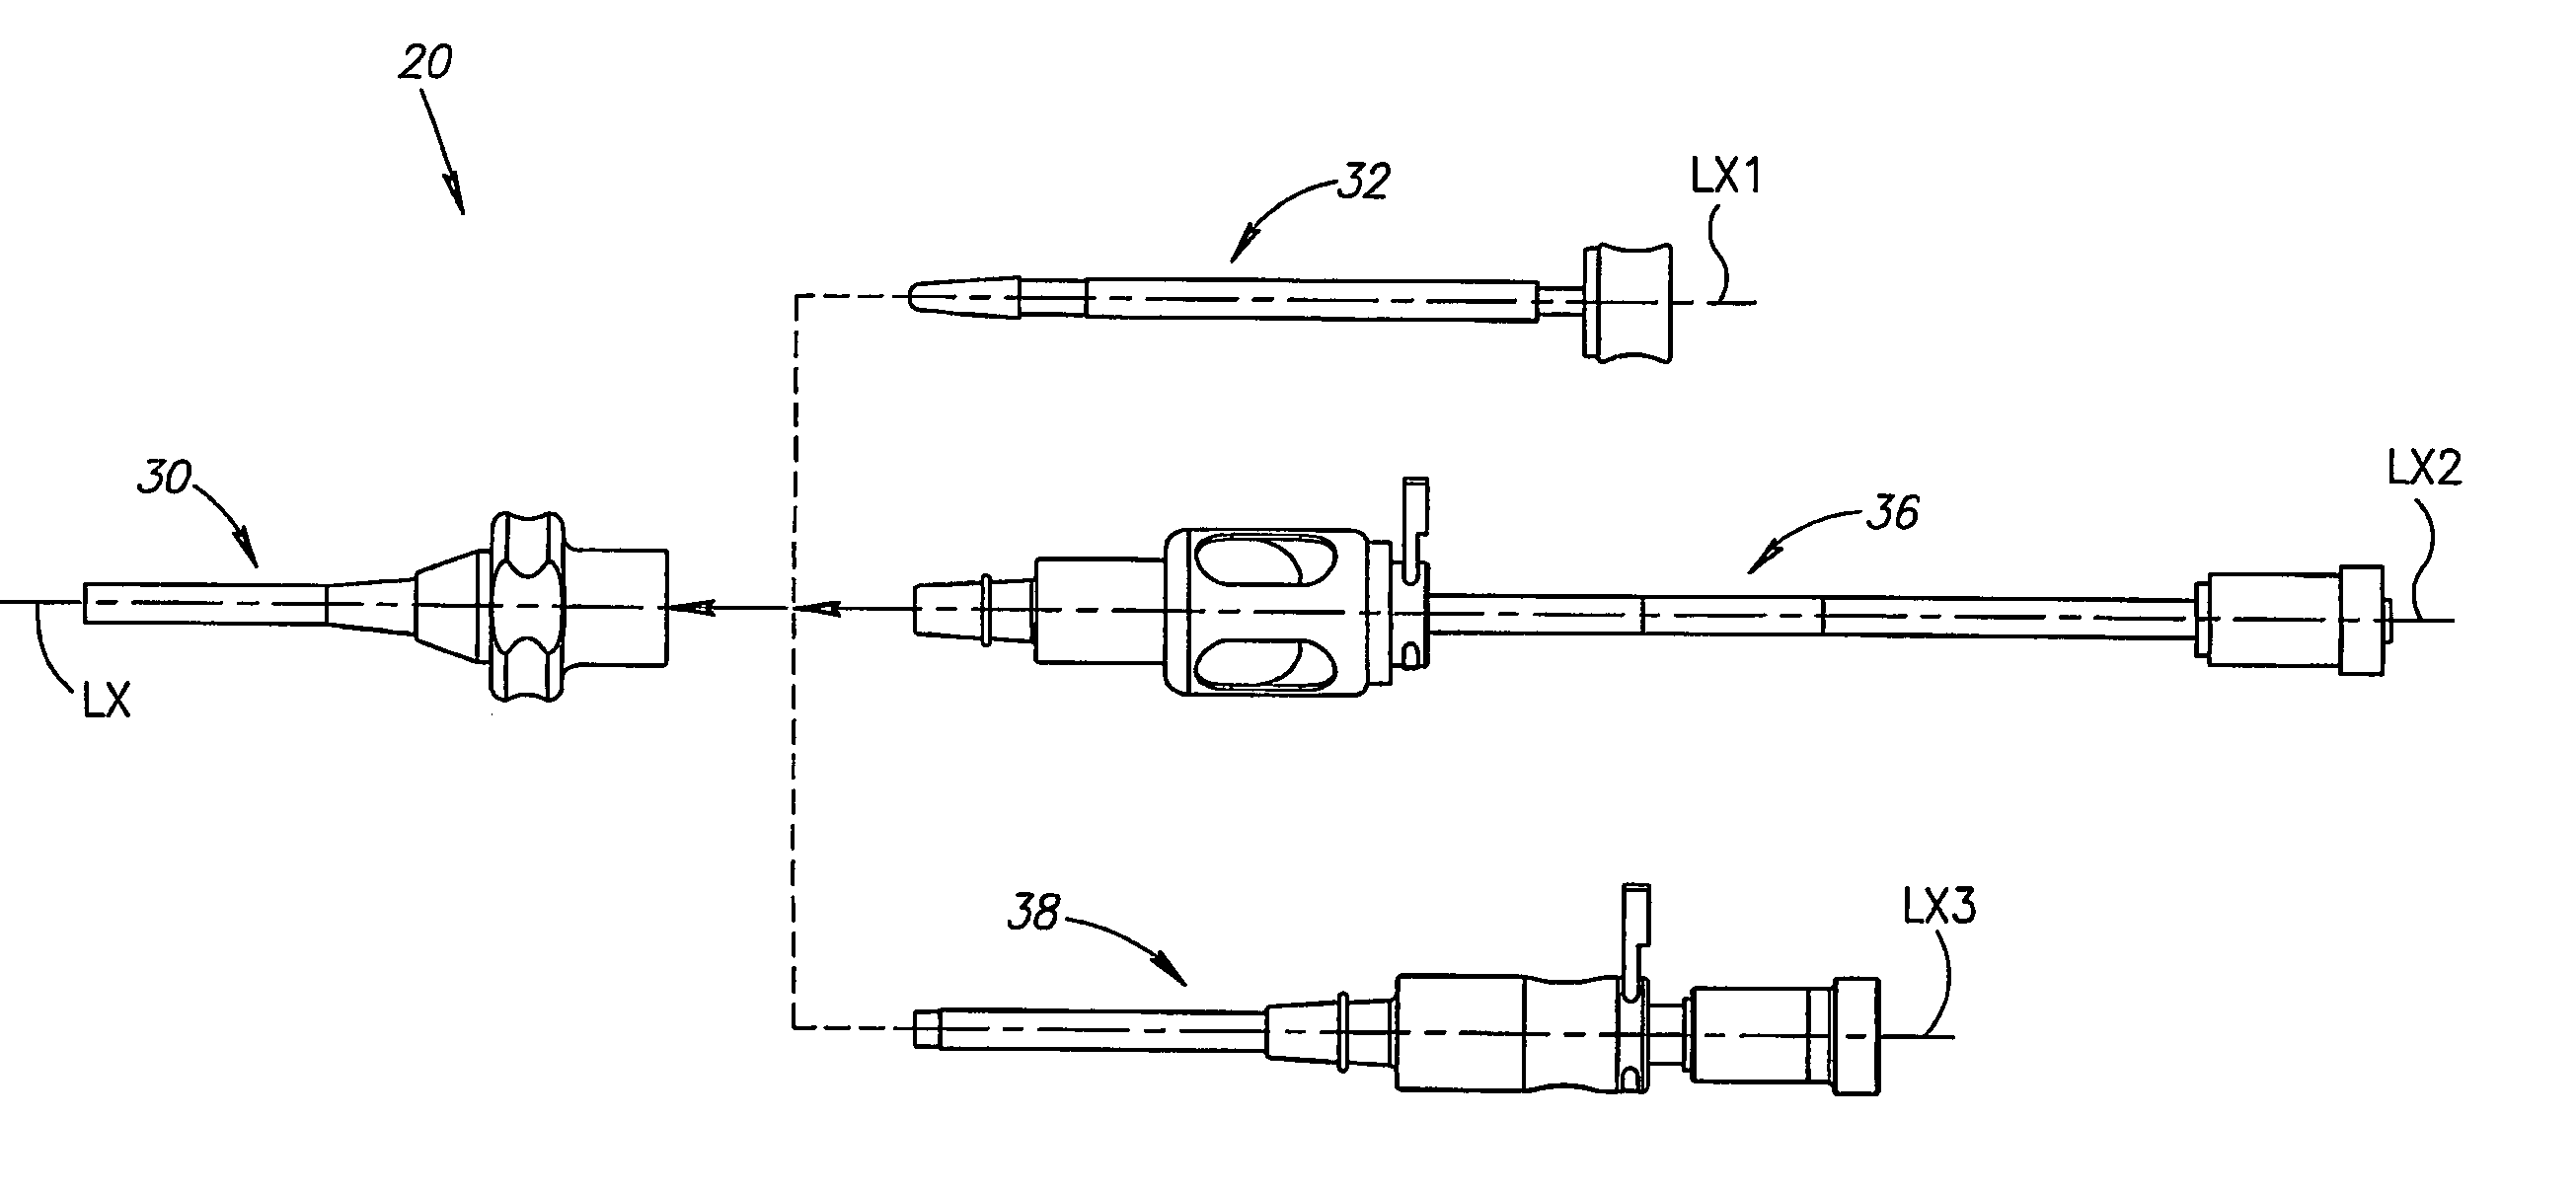 Insertion and retrieval system for inflatable devices